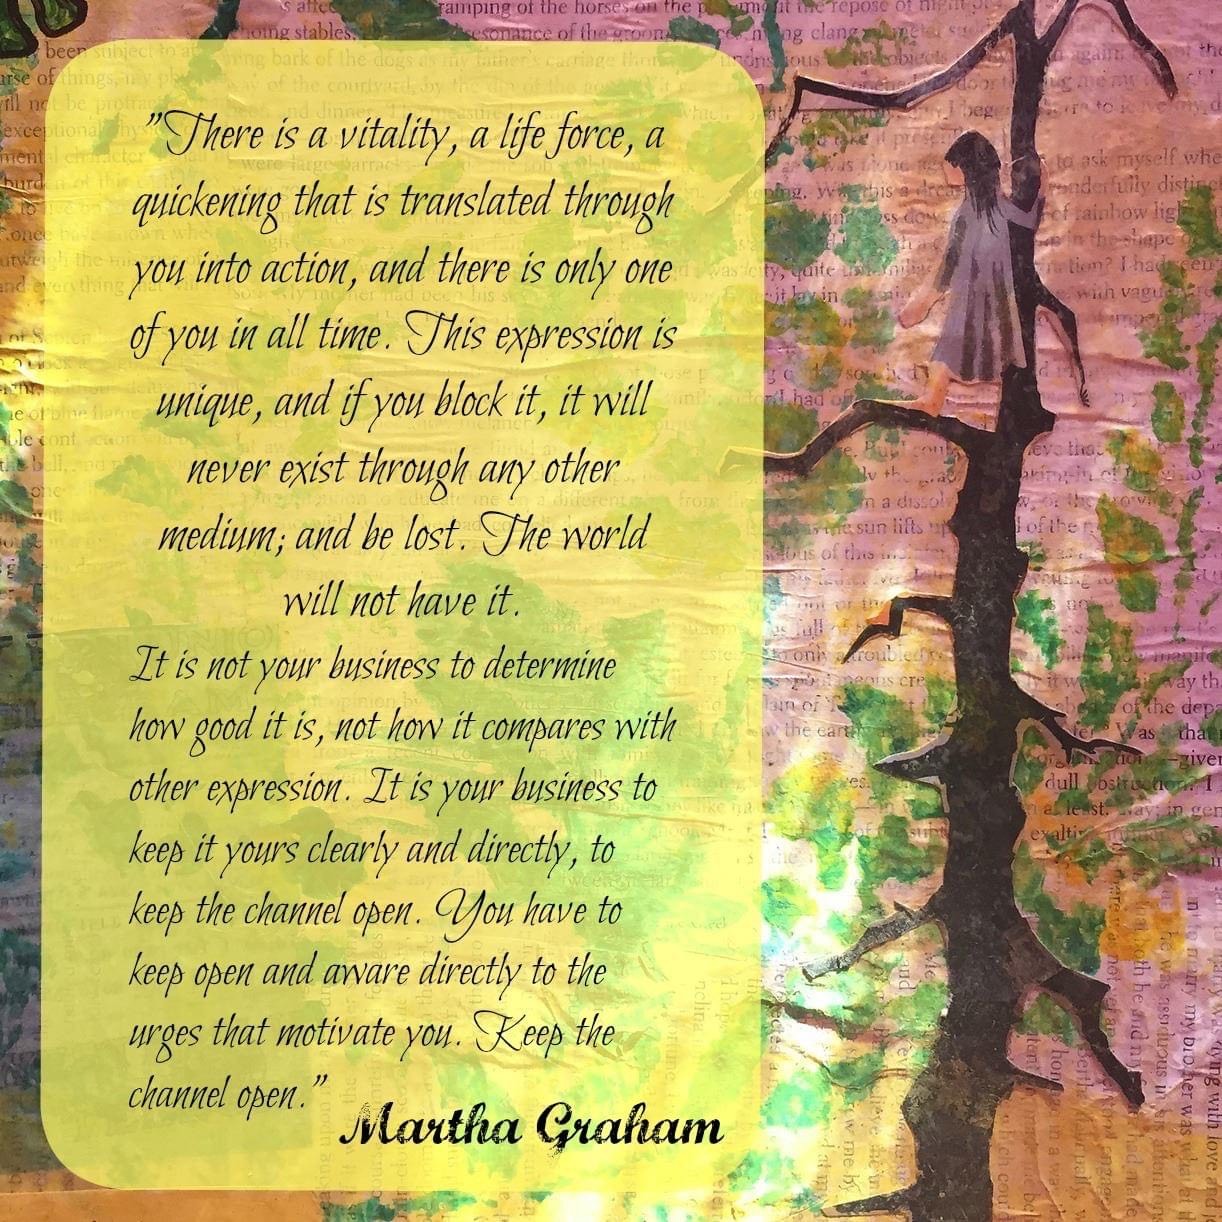 Mixed media art of a girl climbing a tree with the Martha Graham quote, There is a vitality, a life force, an energy, a quickening, that is translated through you into action, and because there is only one of you in all time, this expression is unique, and if you block it, it will never exist through any other medium and will be lost."
